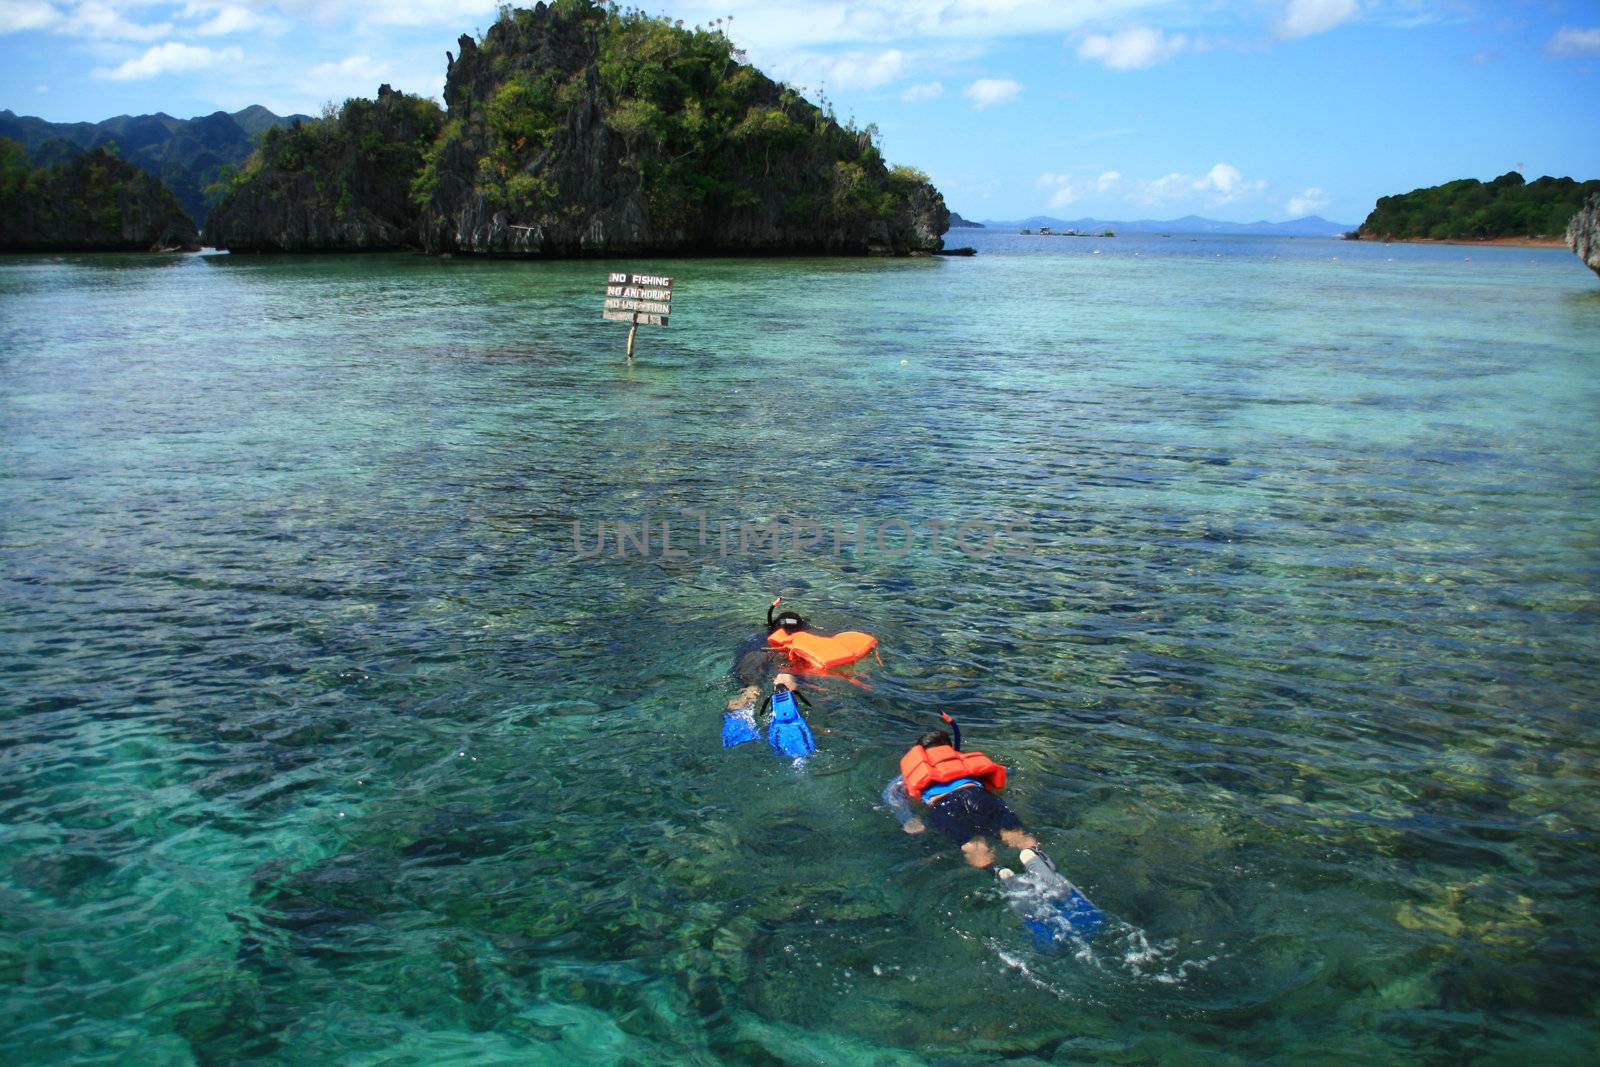 two snorkelers exploring the beauty of underwater marine life
